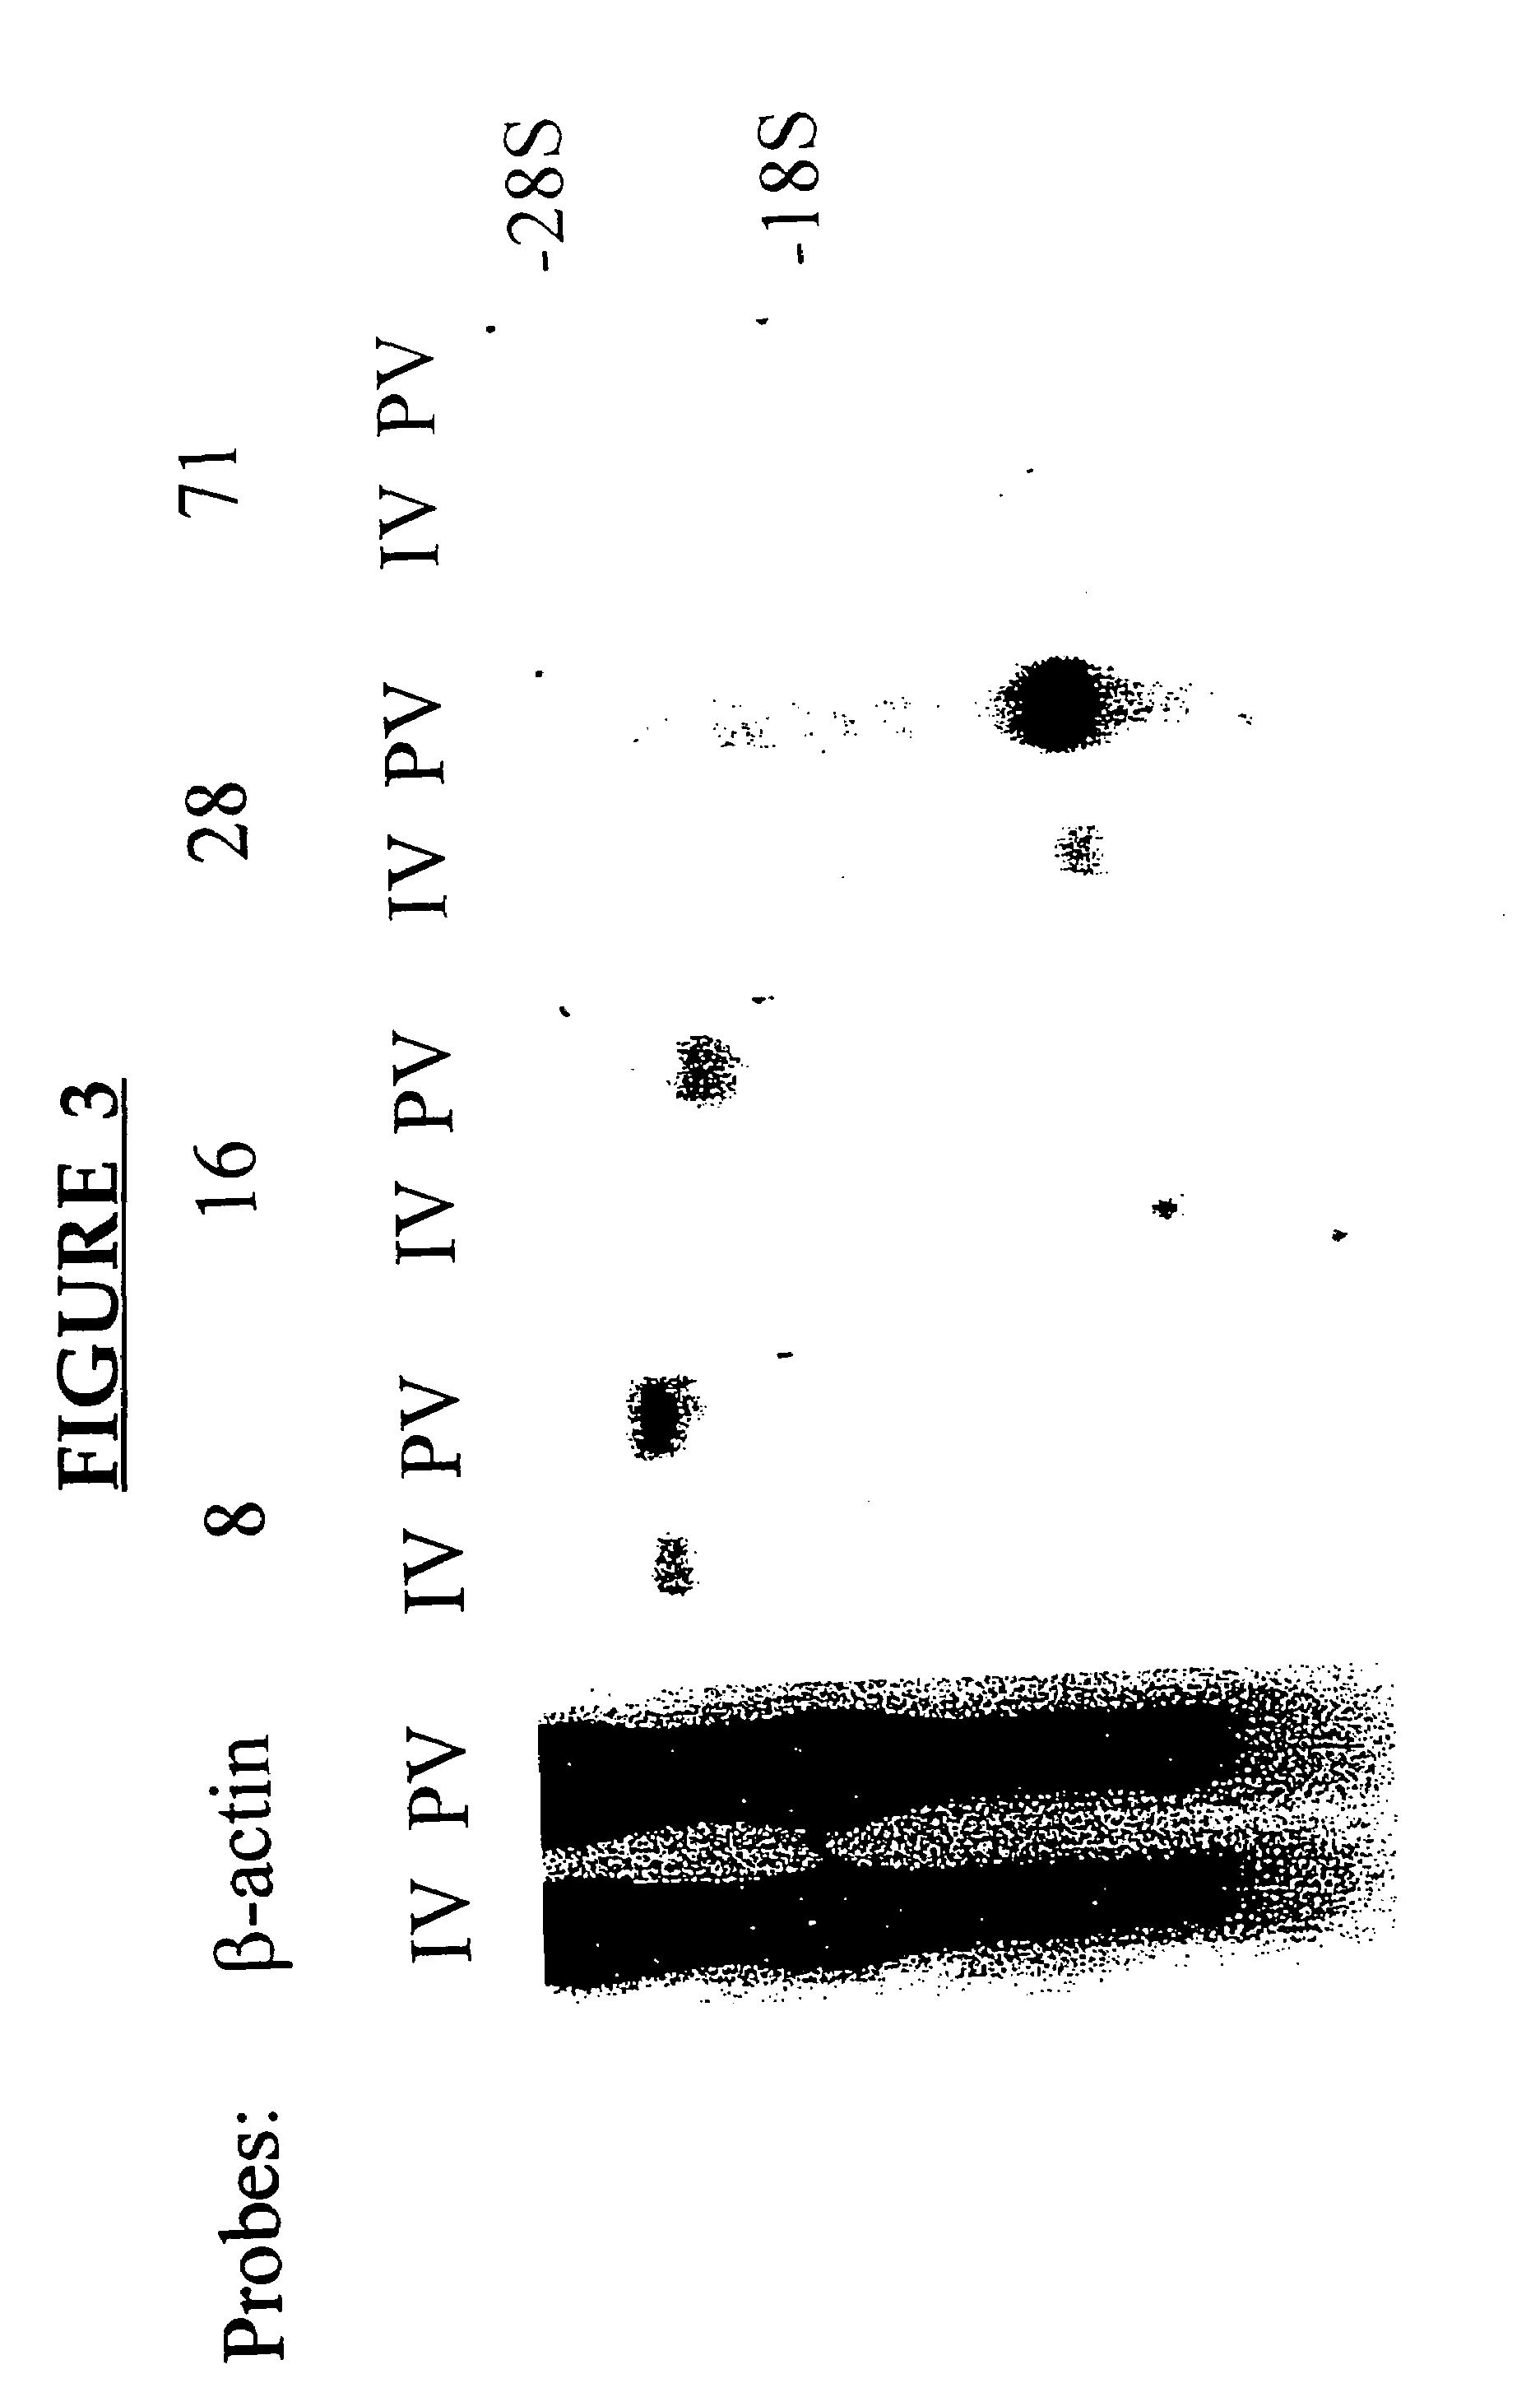 Methods of treating allergy by administering a CD200 protein